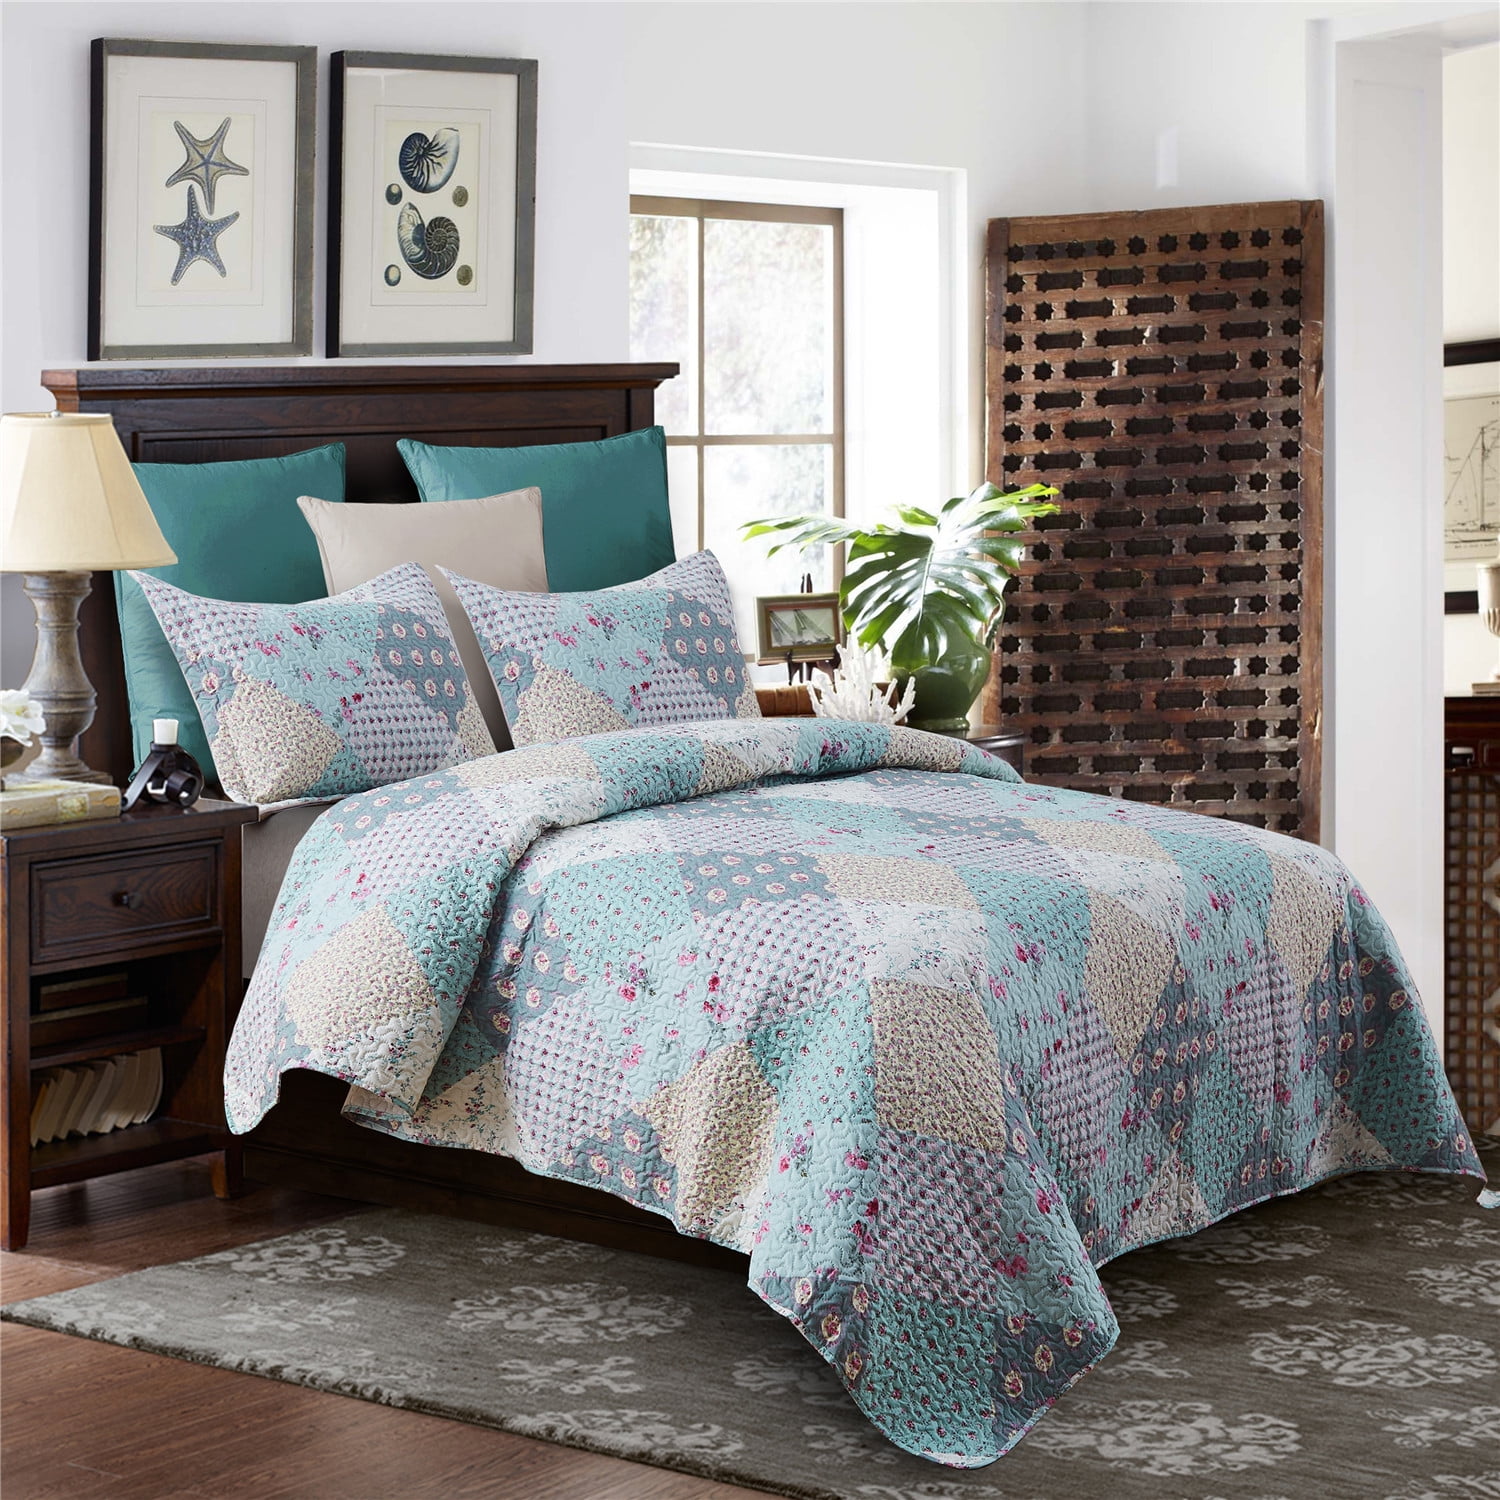 Green King Decarl Bedroom Quilt Modern Light Weight Air-conditioning Solid Bedding Quilted Bedspreads 